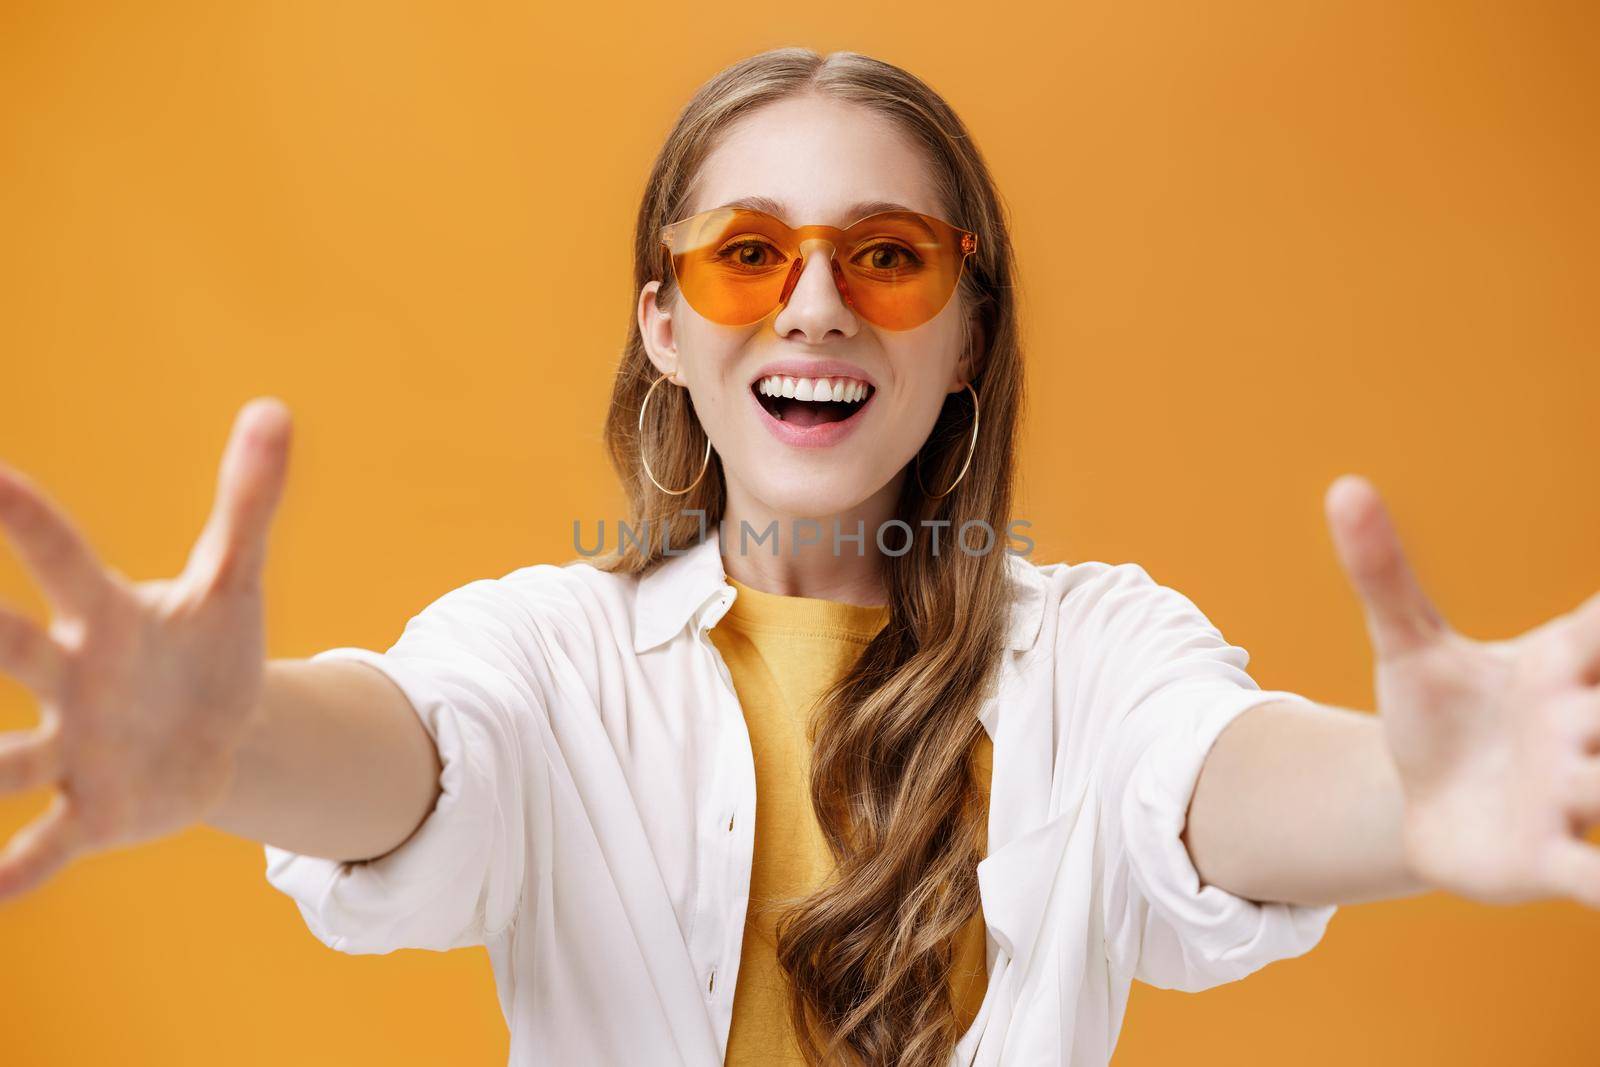 Lifestyle. Girl reaching to camera to hug or grab thing looking forward with broad grin and excited desiring expression wanting hold in hands new product posing amused and happy over orange background.